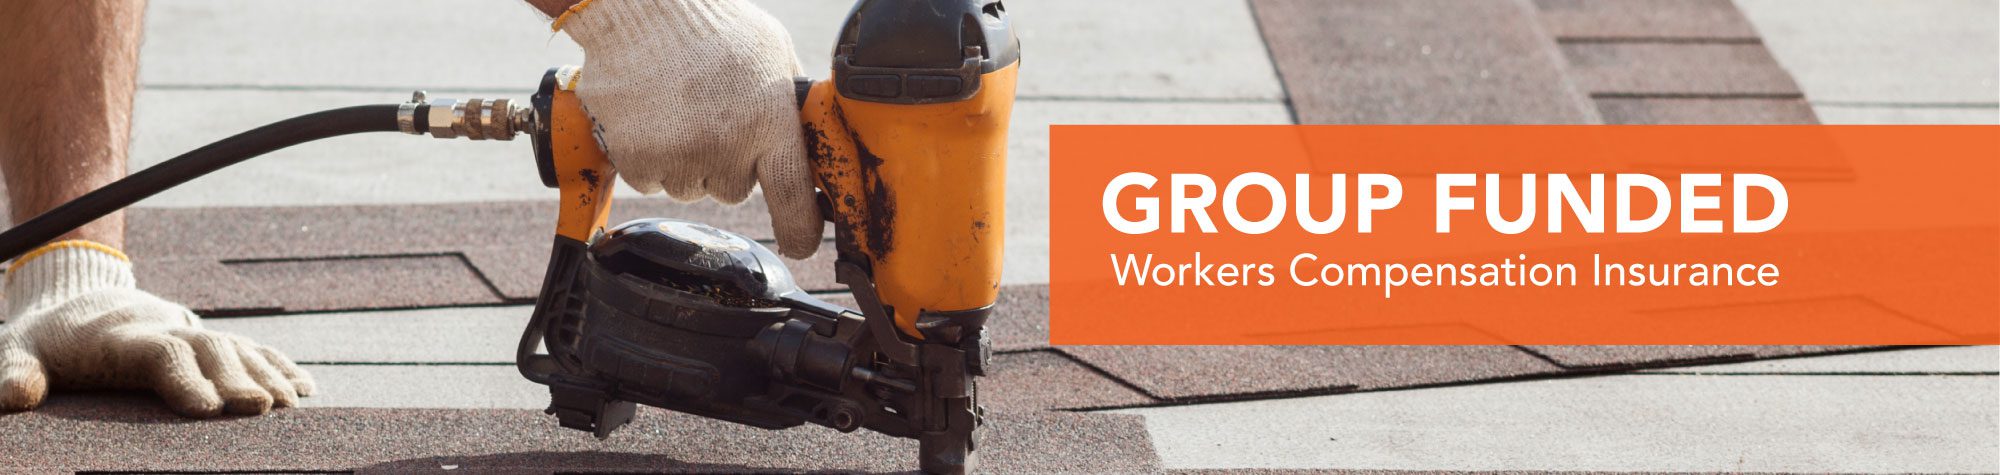 Group Funded Workers Compensation